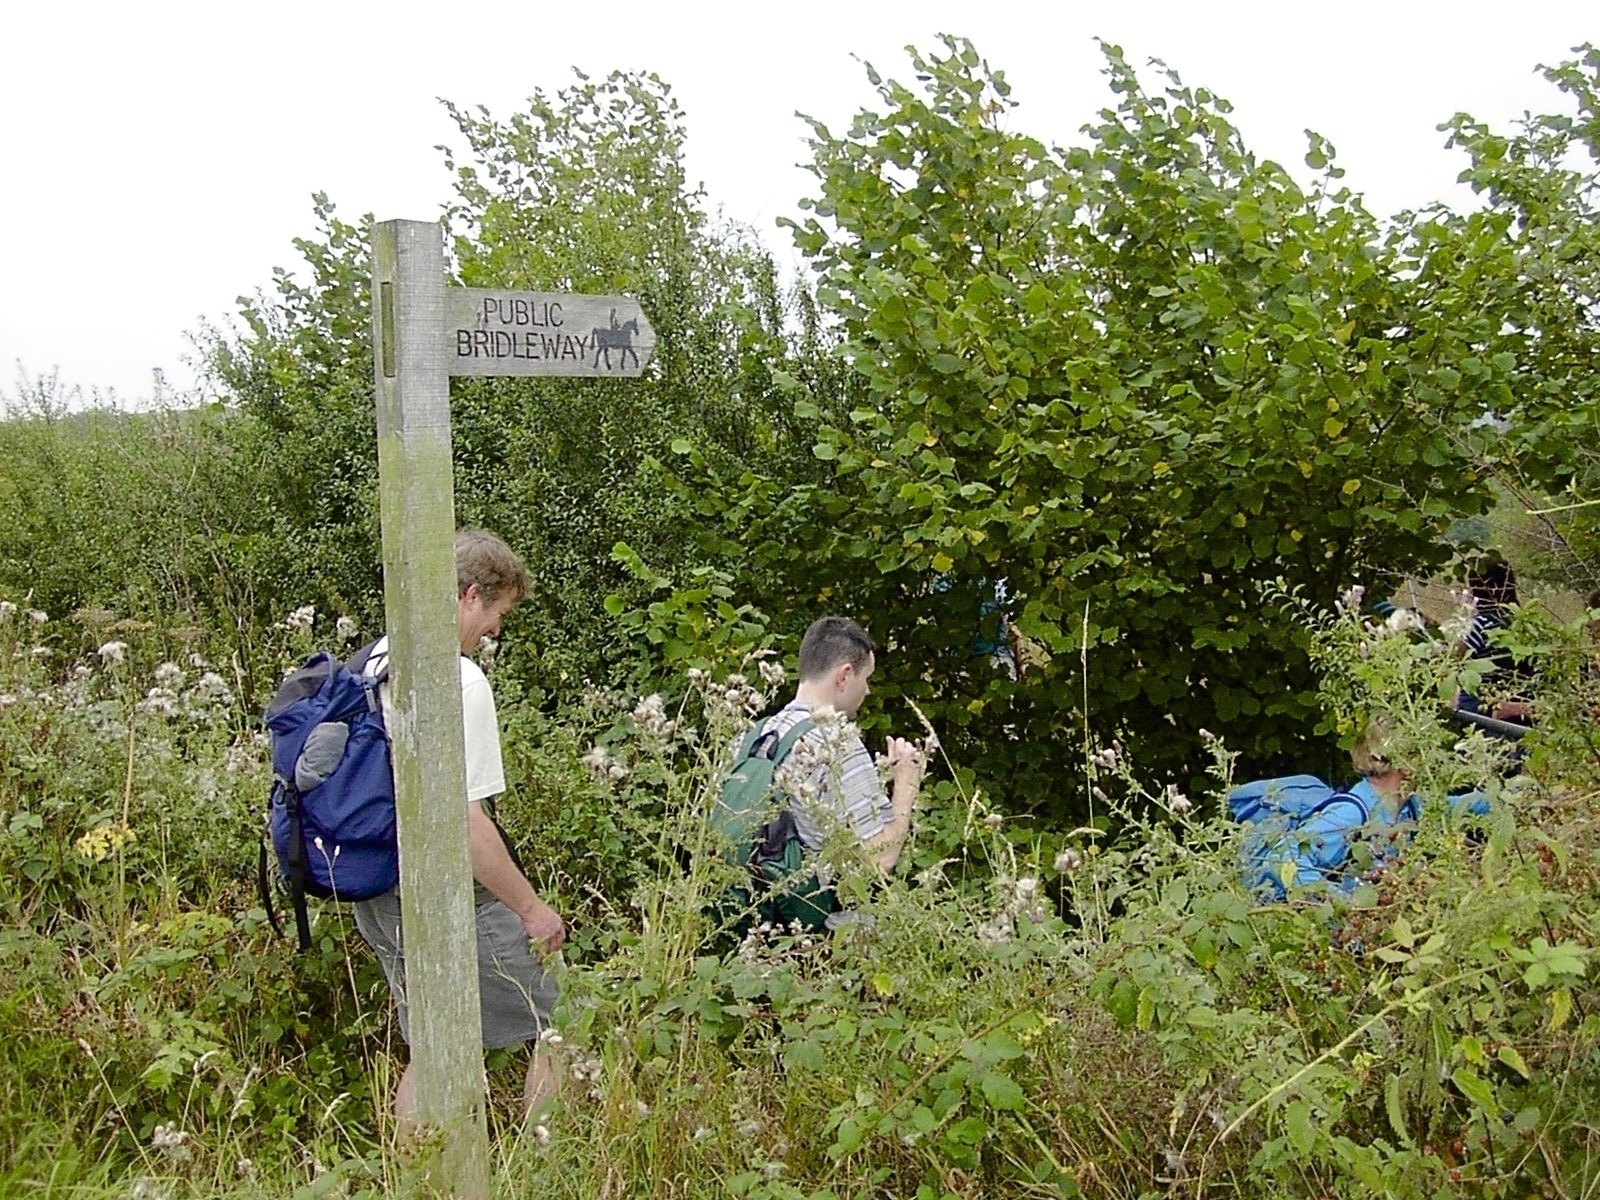 Walkers on a bridleway in Herefordshire